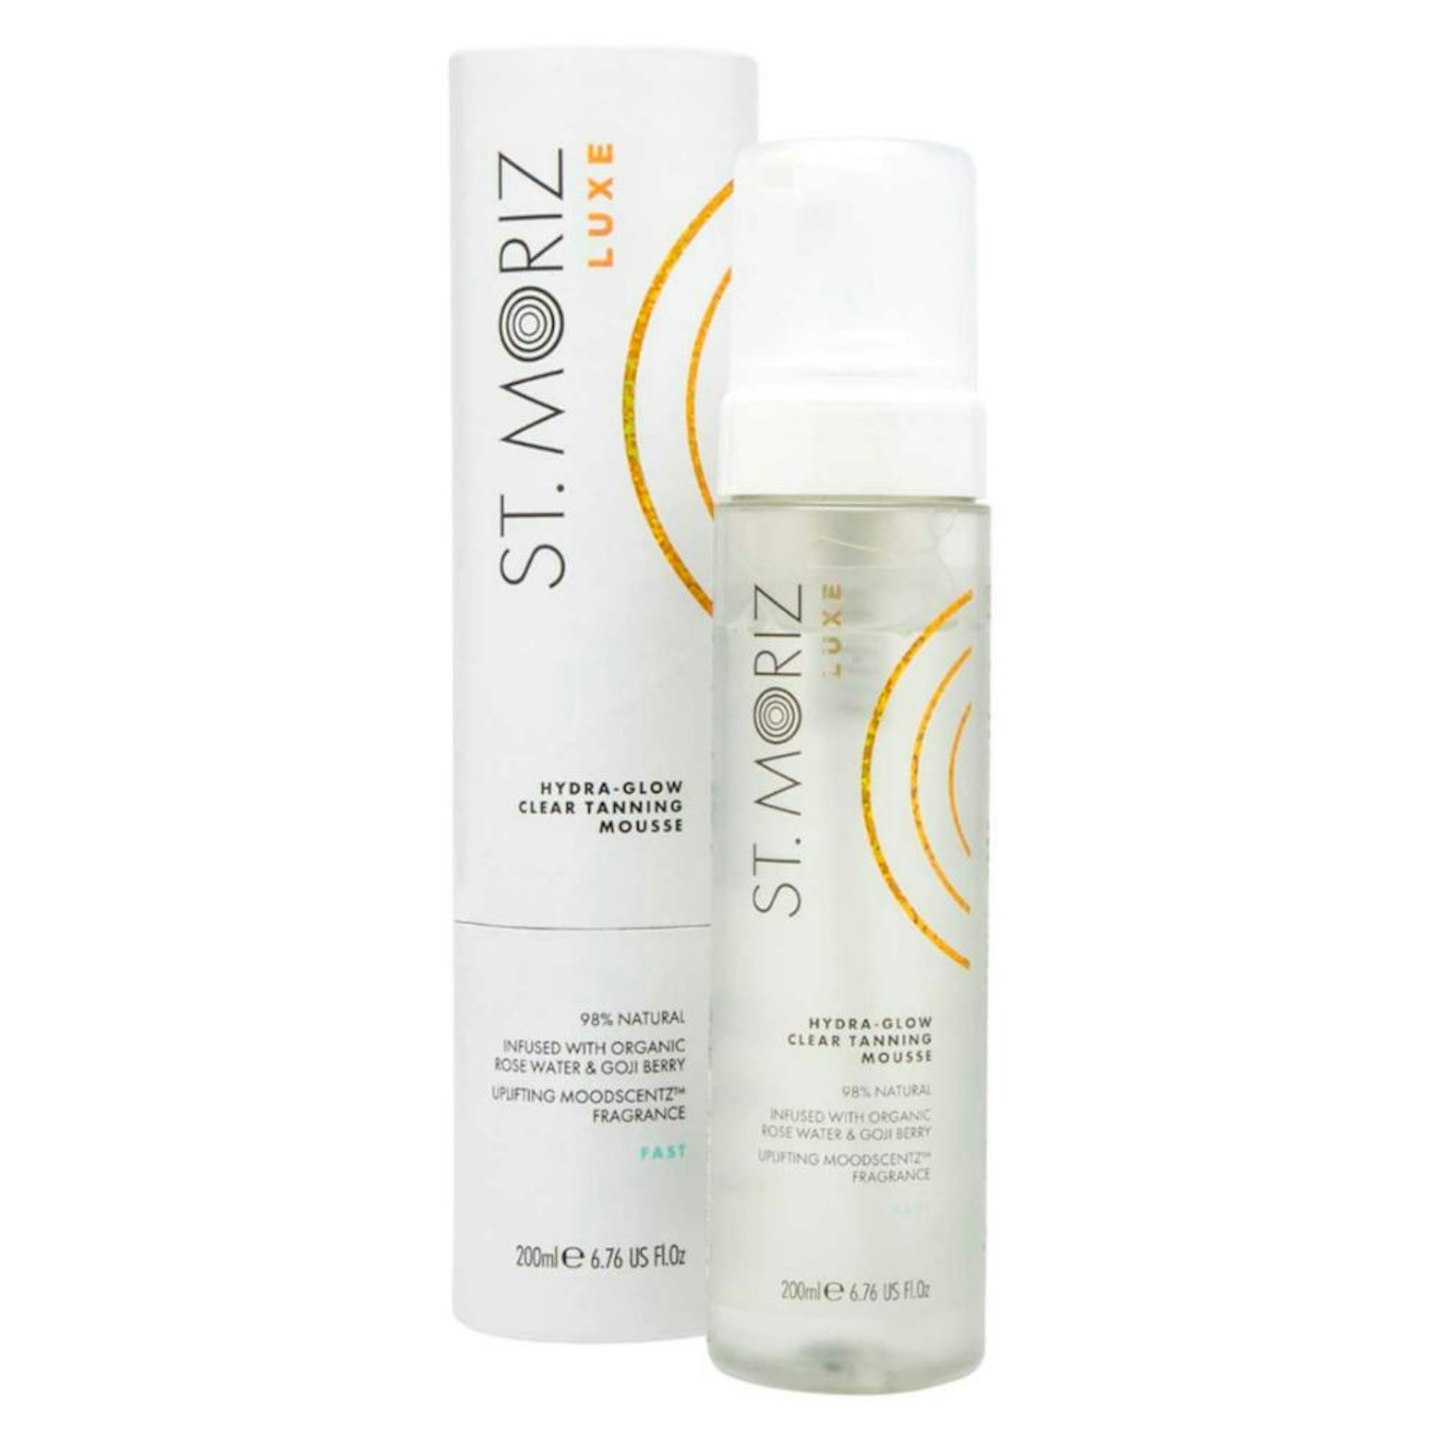 St Moriz Luxe Hydra-Glow Clear Tanning Mousse 